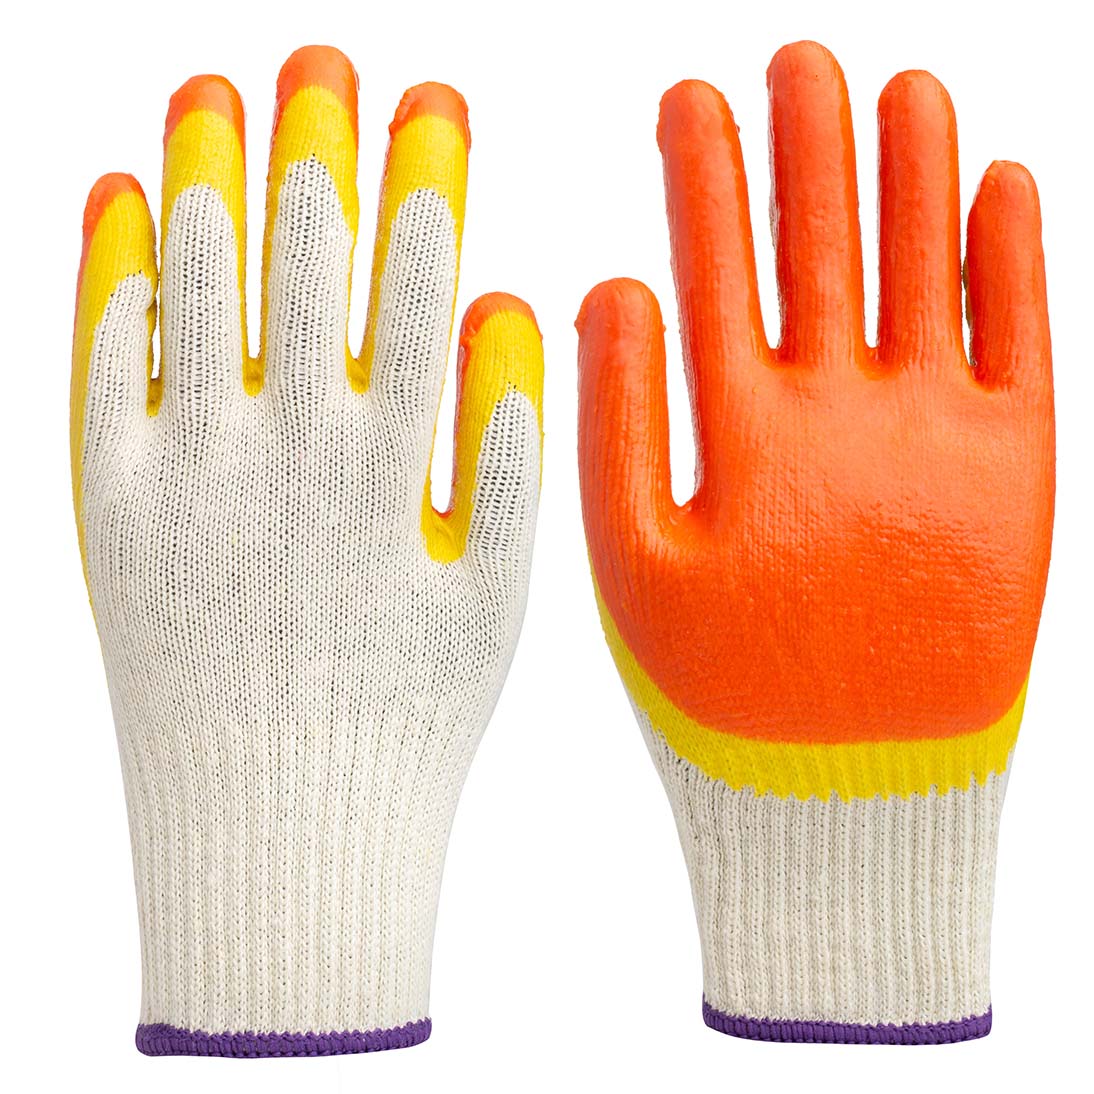 10G polycotton glove double latex coated